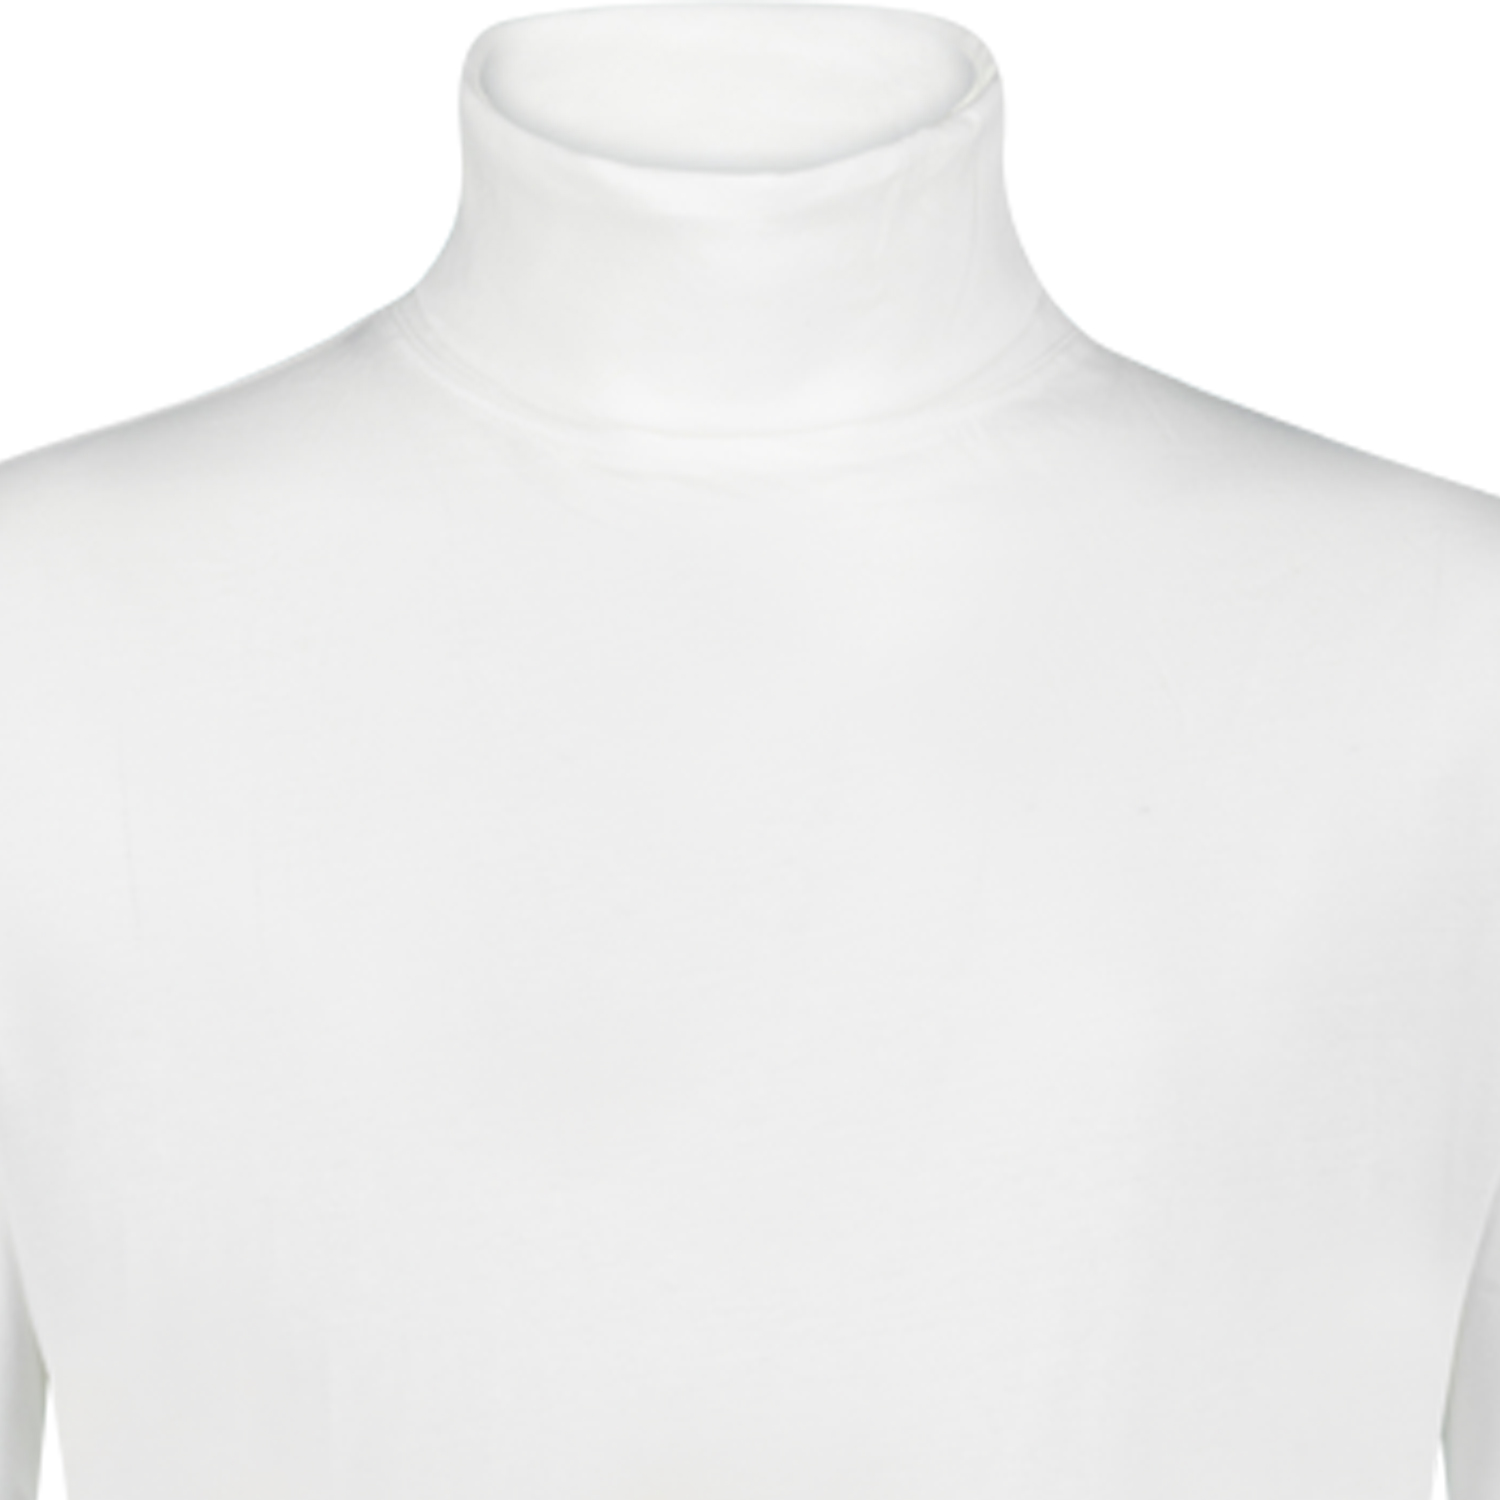 ADAMO longsleeve COMFORT FIT for men in white with turtle neck up to size 12XL